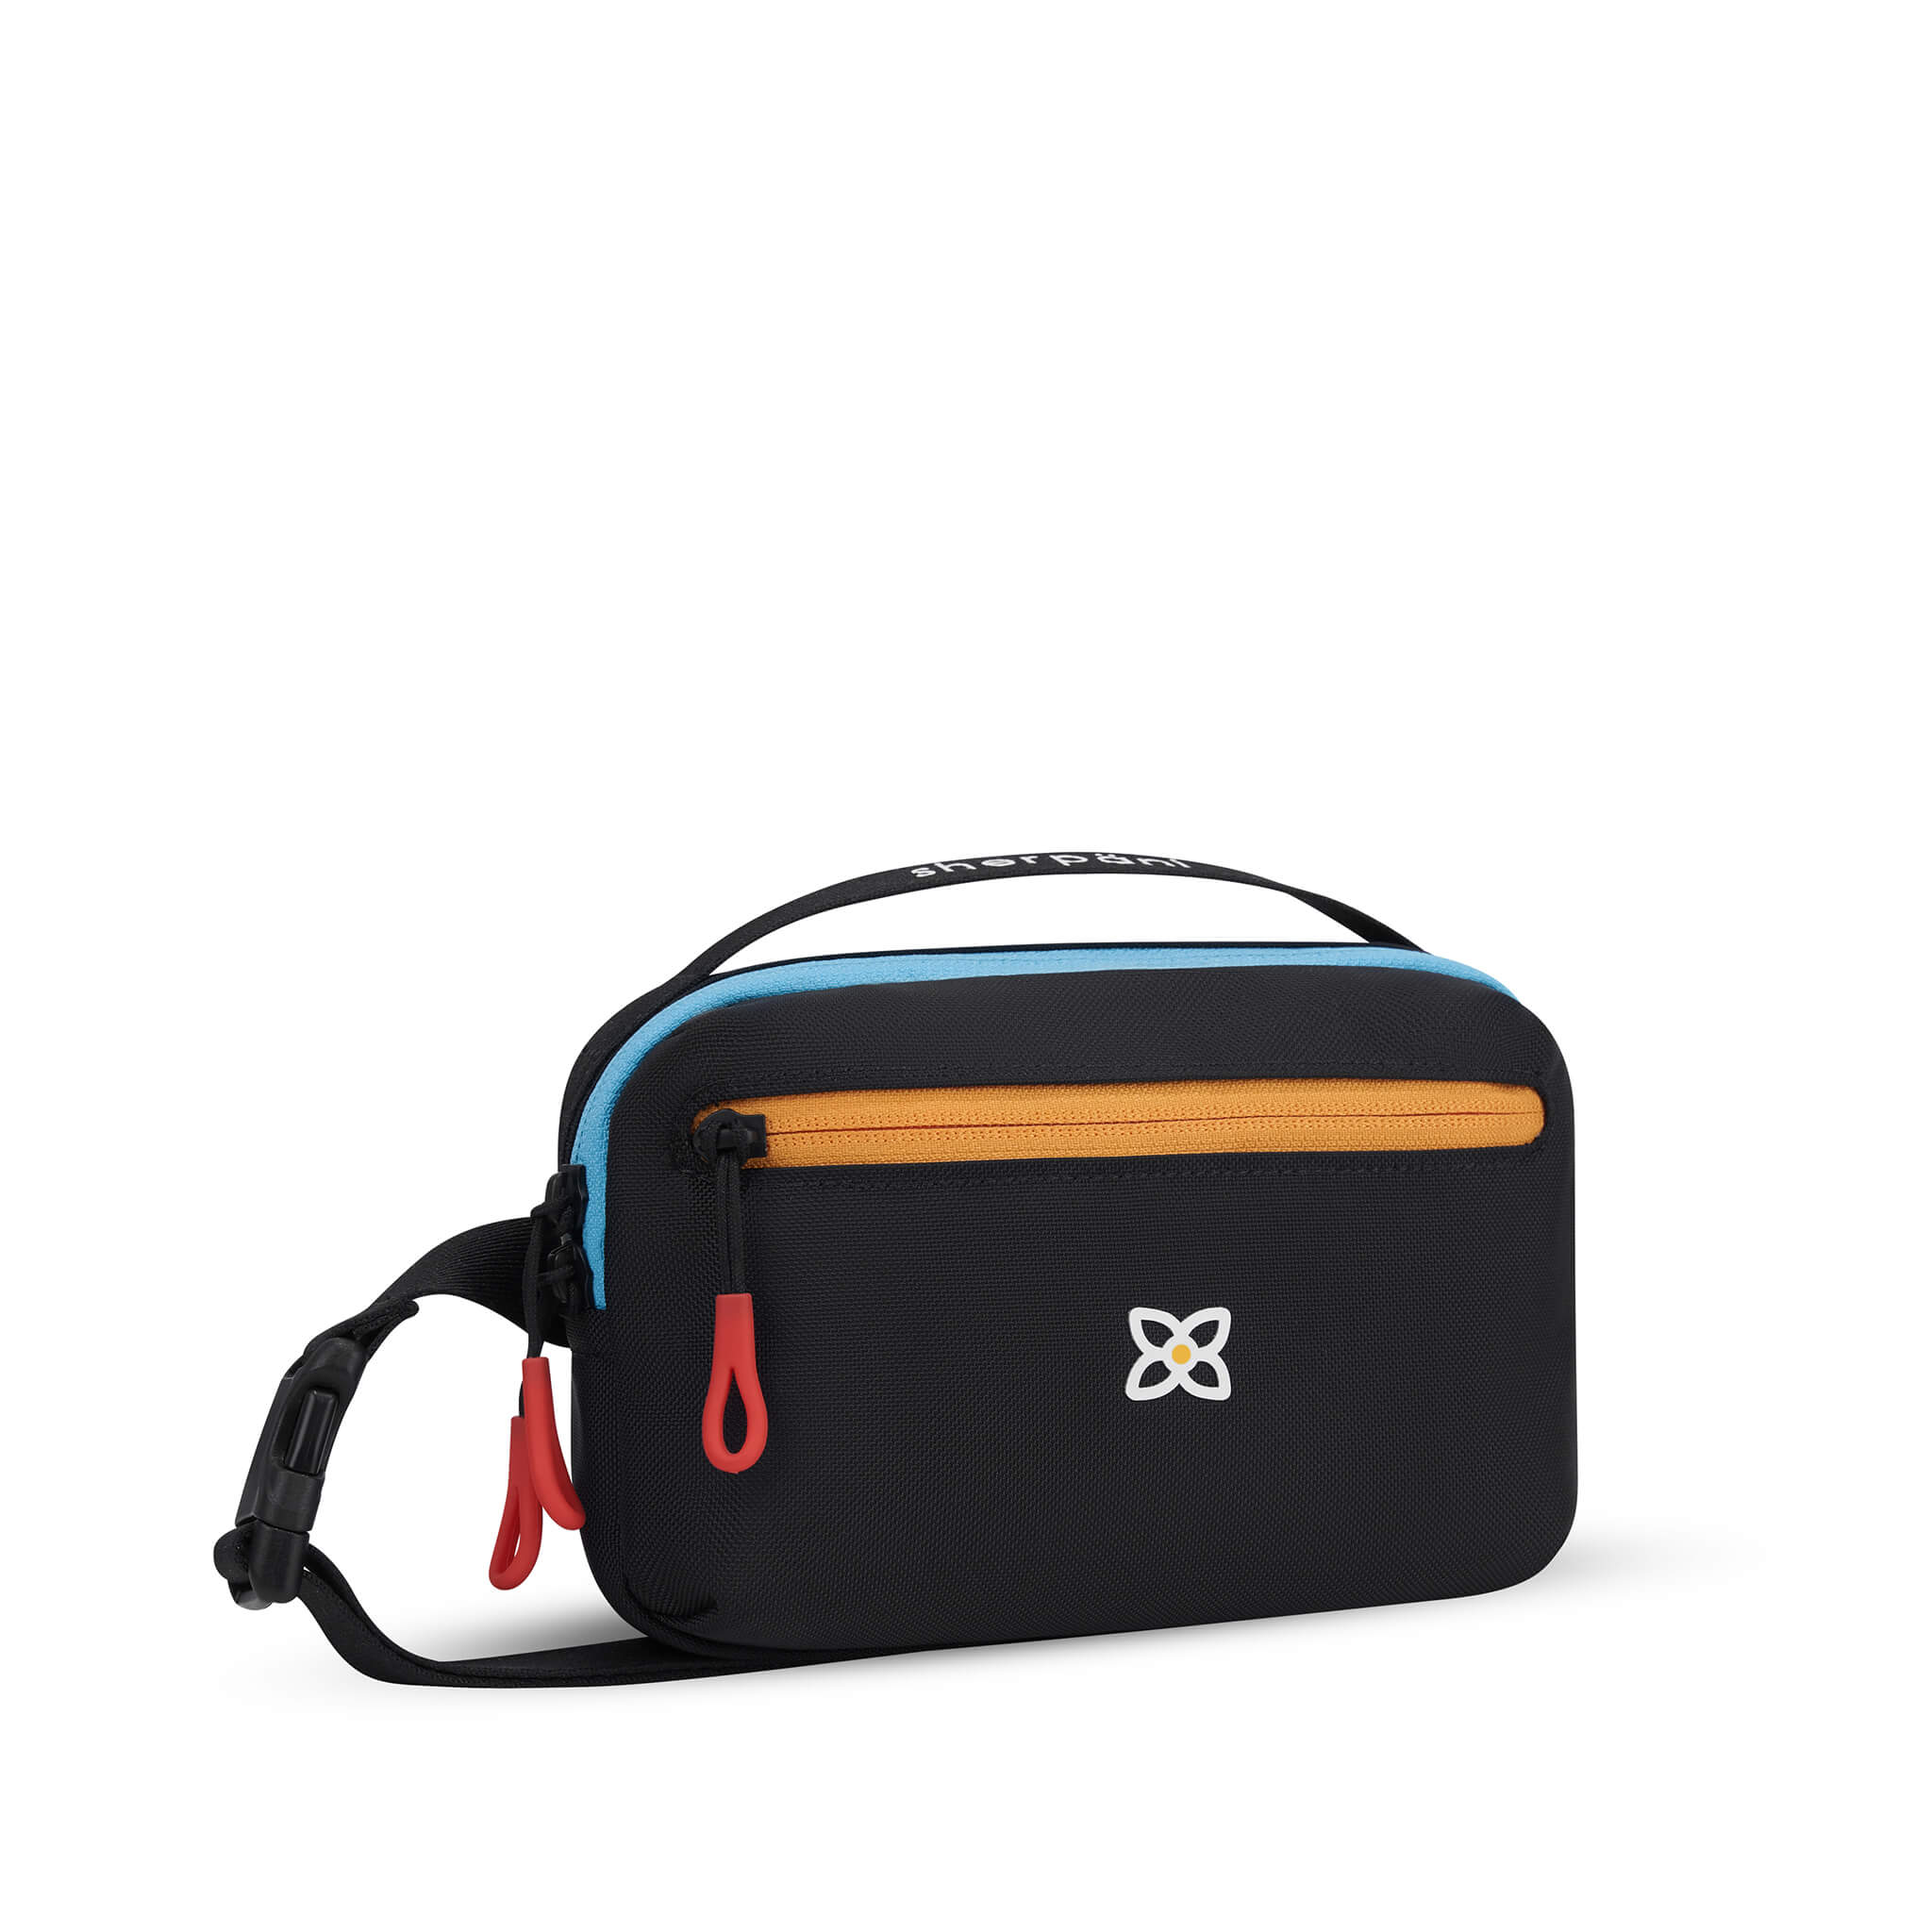 Angled front view of Sherpani’s fanny pack, the Hyk in Chromatic. The bag is black with yellow and blue accents. There is an external zipper pocket on the front of the bag. Easy-pull zippers are accented in red. The fanny pack features an adjustable strap with a buckle. 